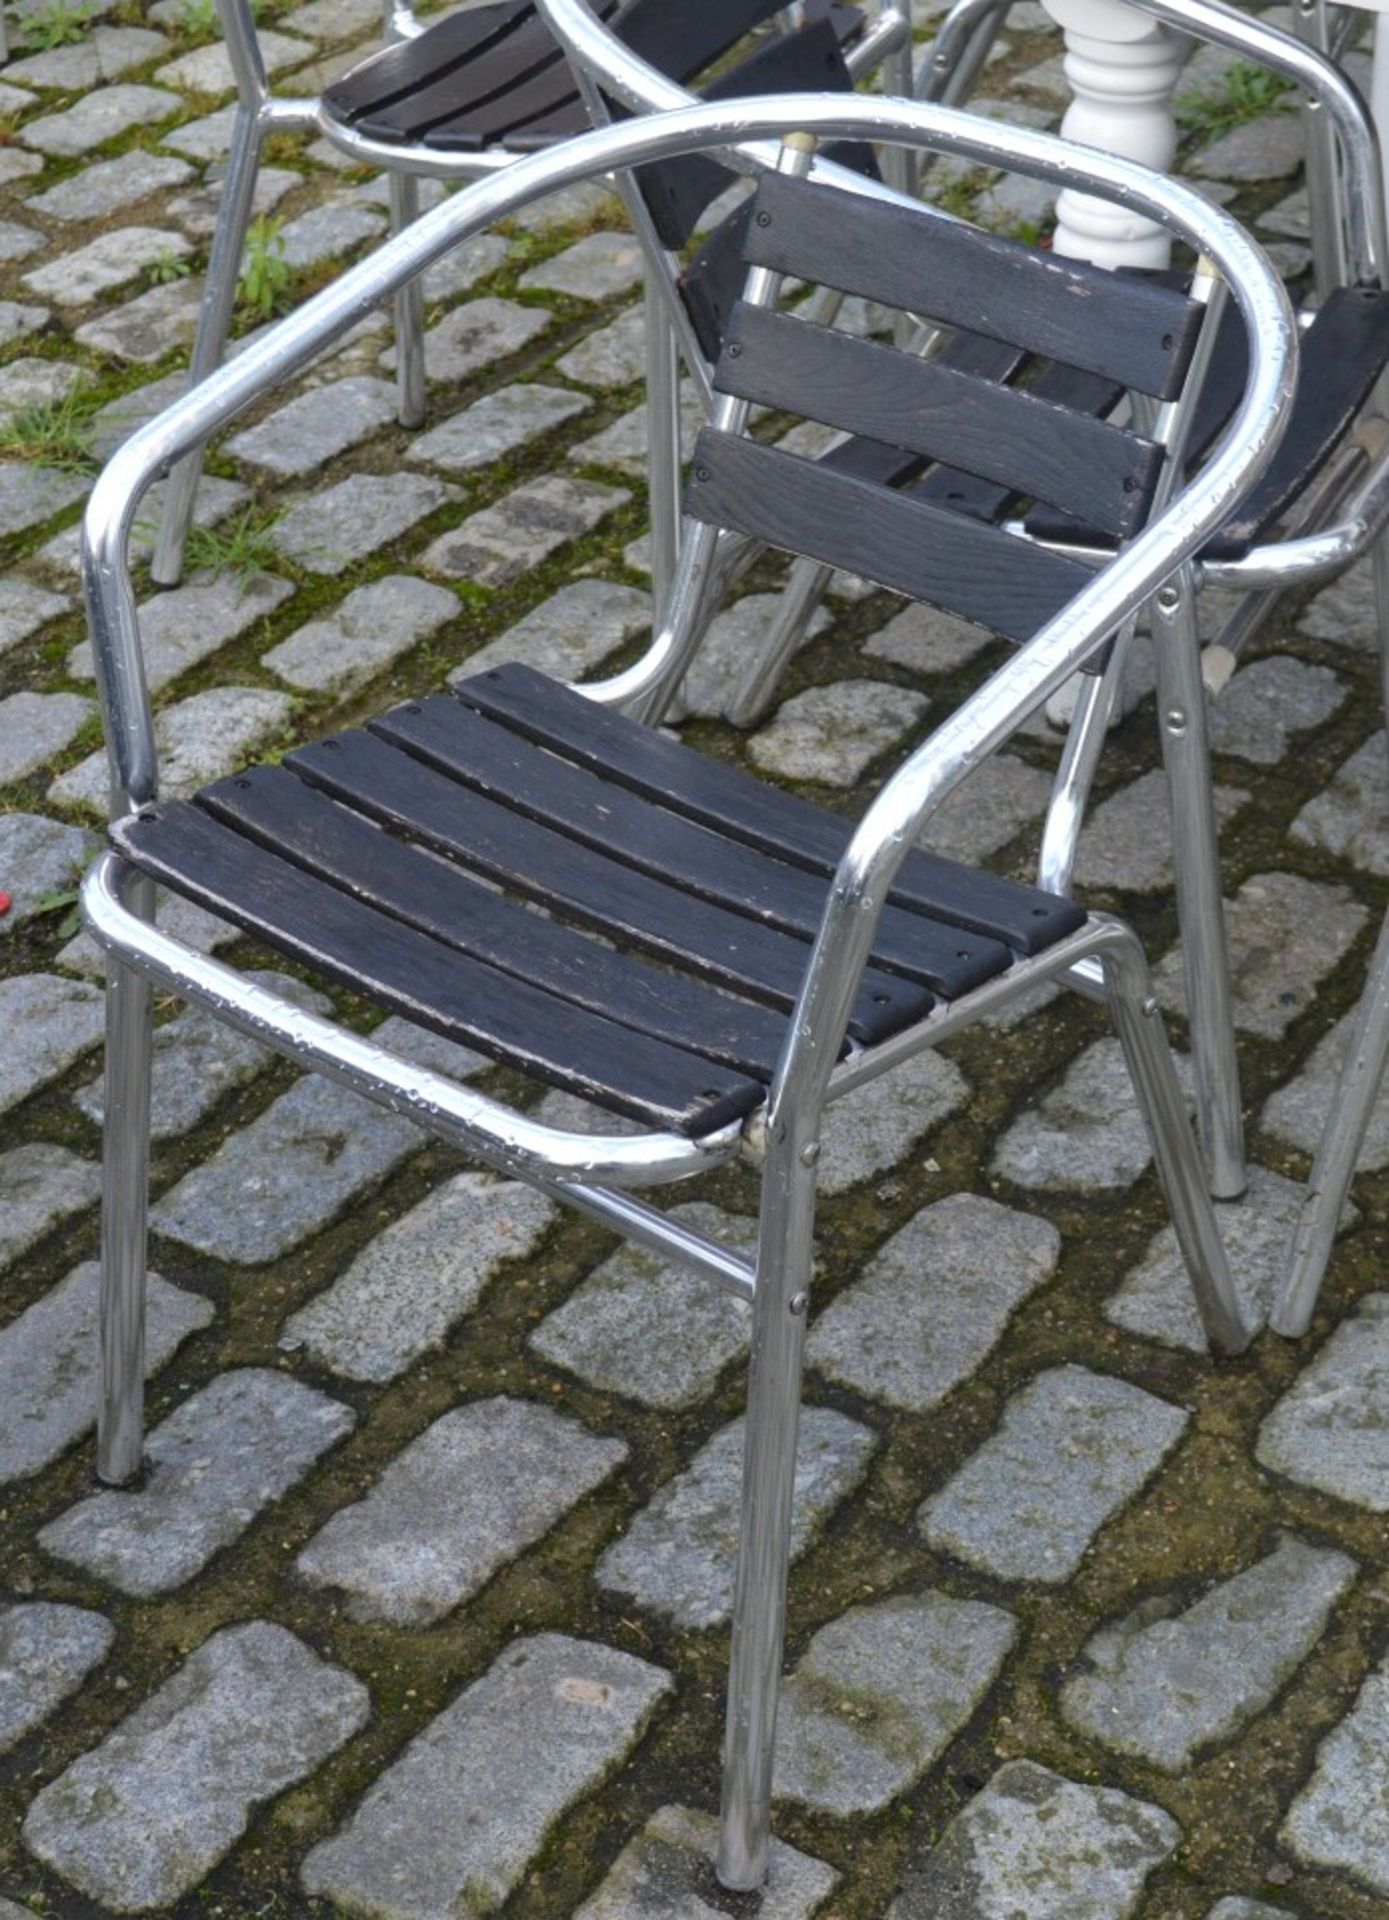 20 x Aluminium Outdoor Garden Chairs With Armrests, Wooden Slatted Seats and Back Rests -